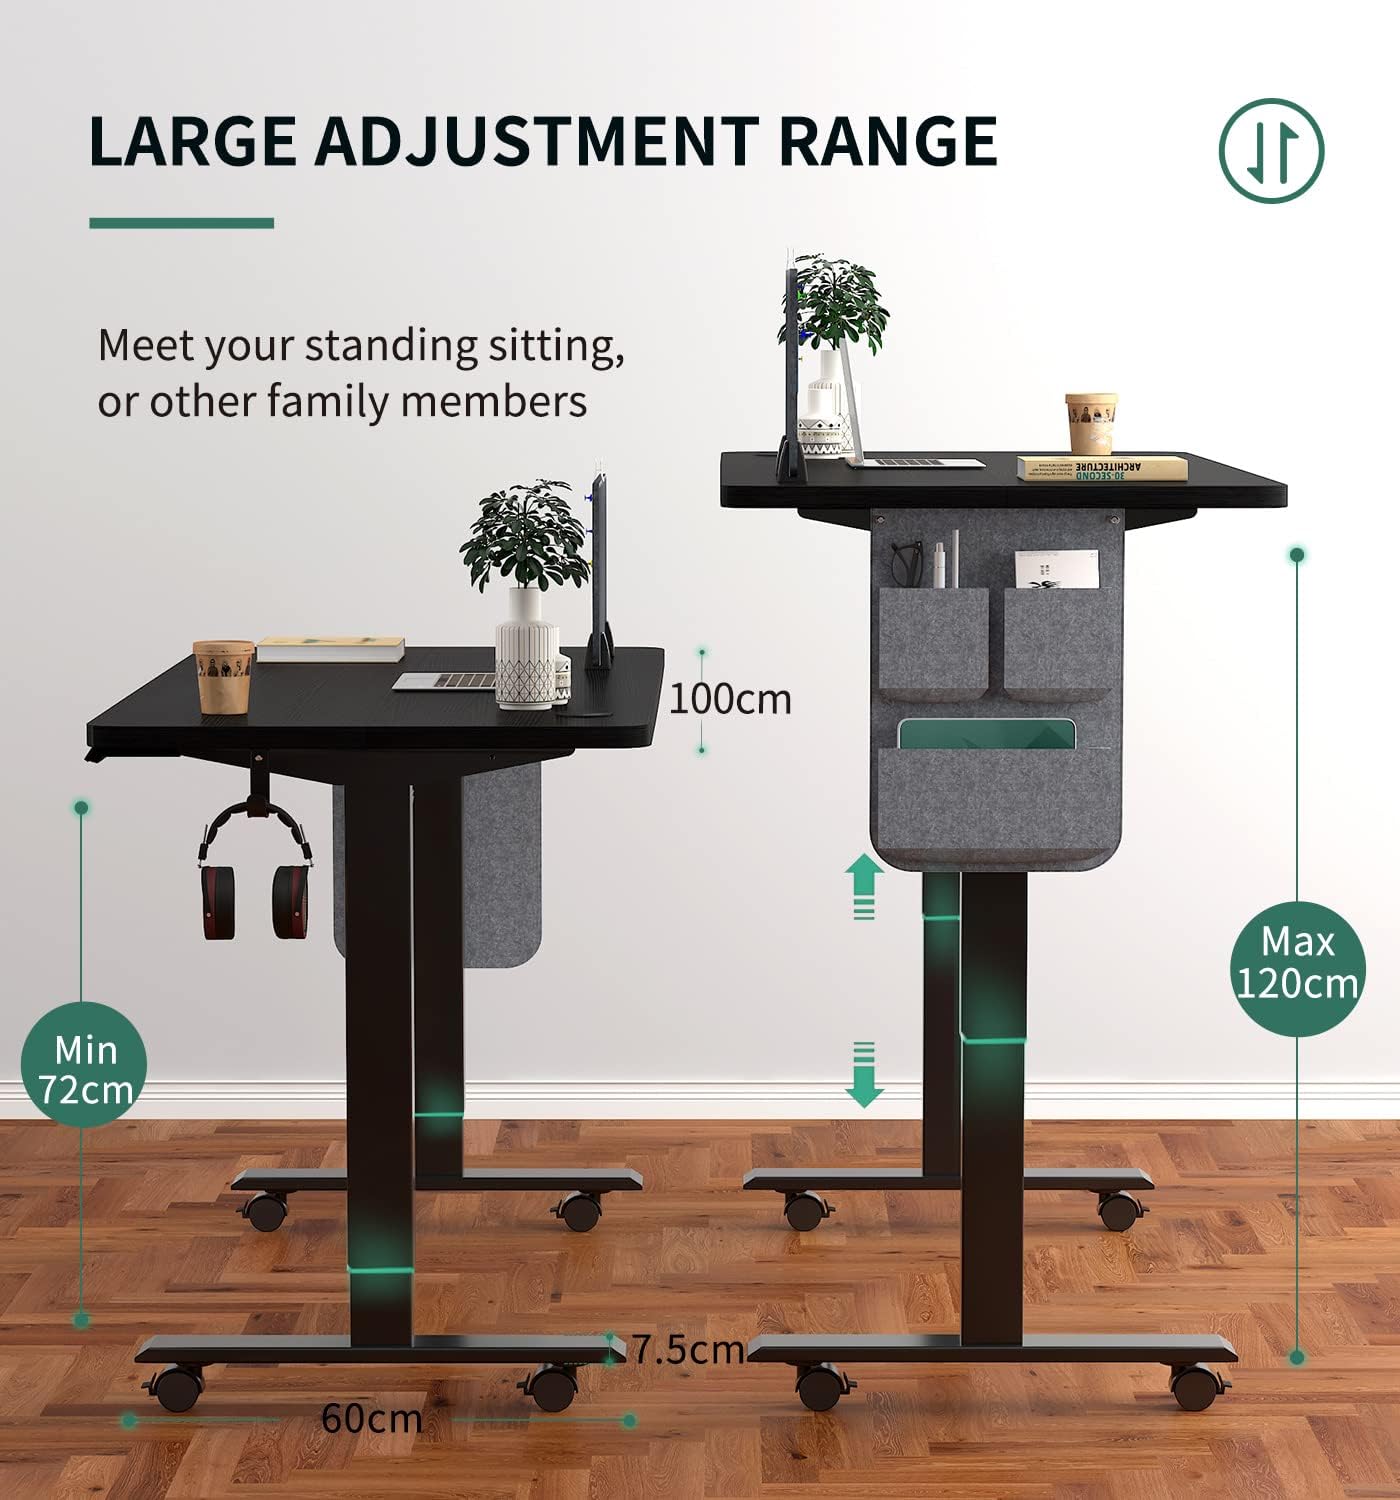 Maidesite standing desk's height adjustable range 72-120cm, meet your standing sitting, or other family members